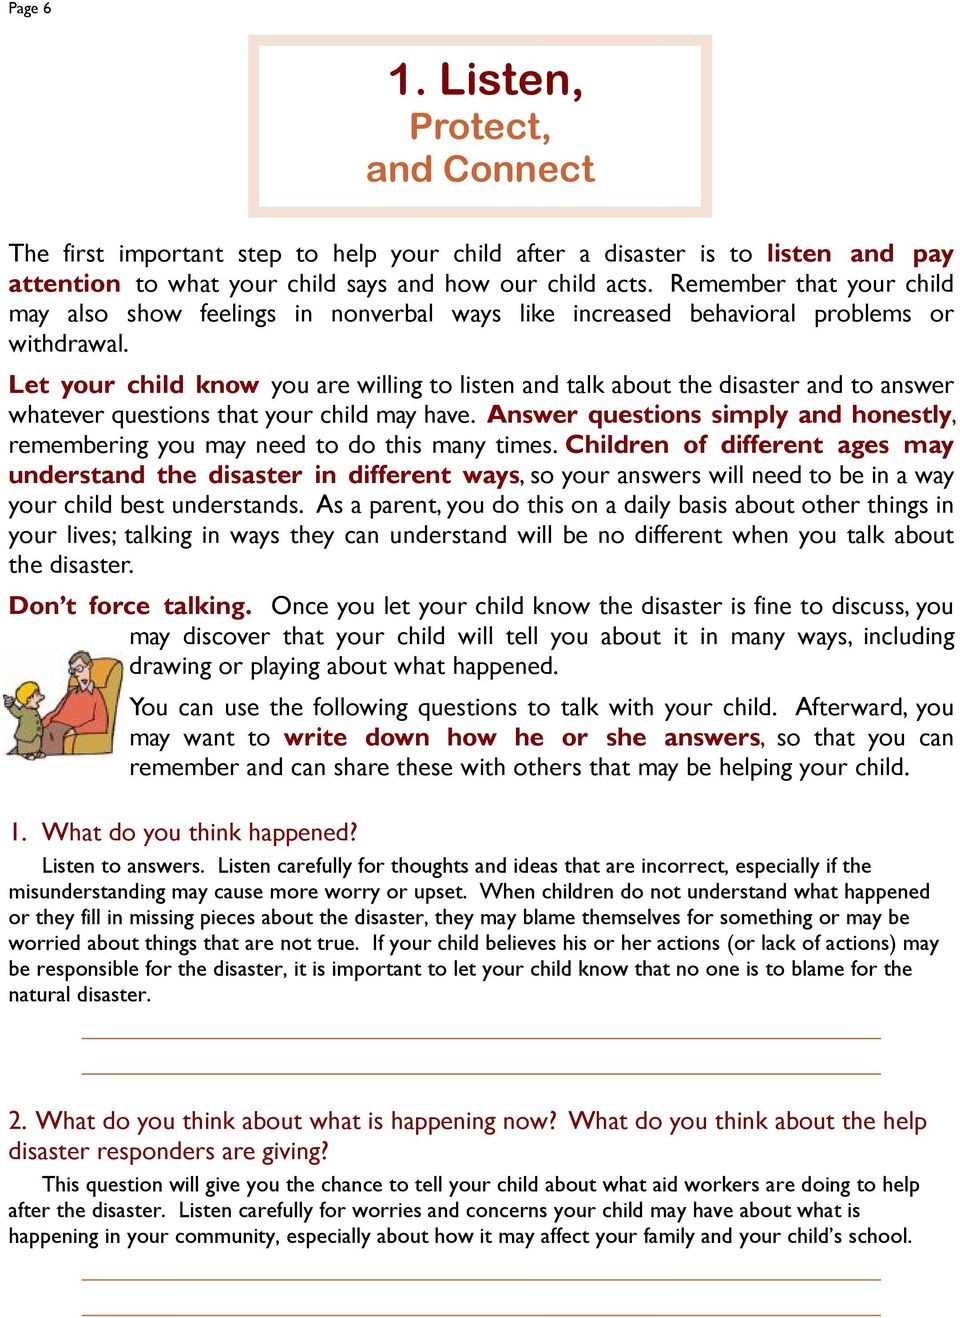 Let your child know you are willing to listen and talk about the disaster and to answer whatever questions that your child may have.